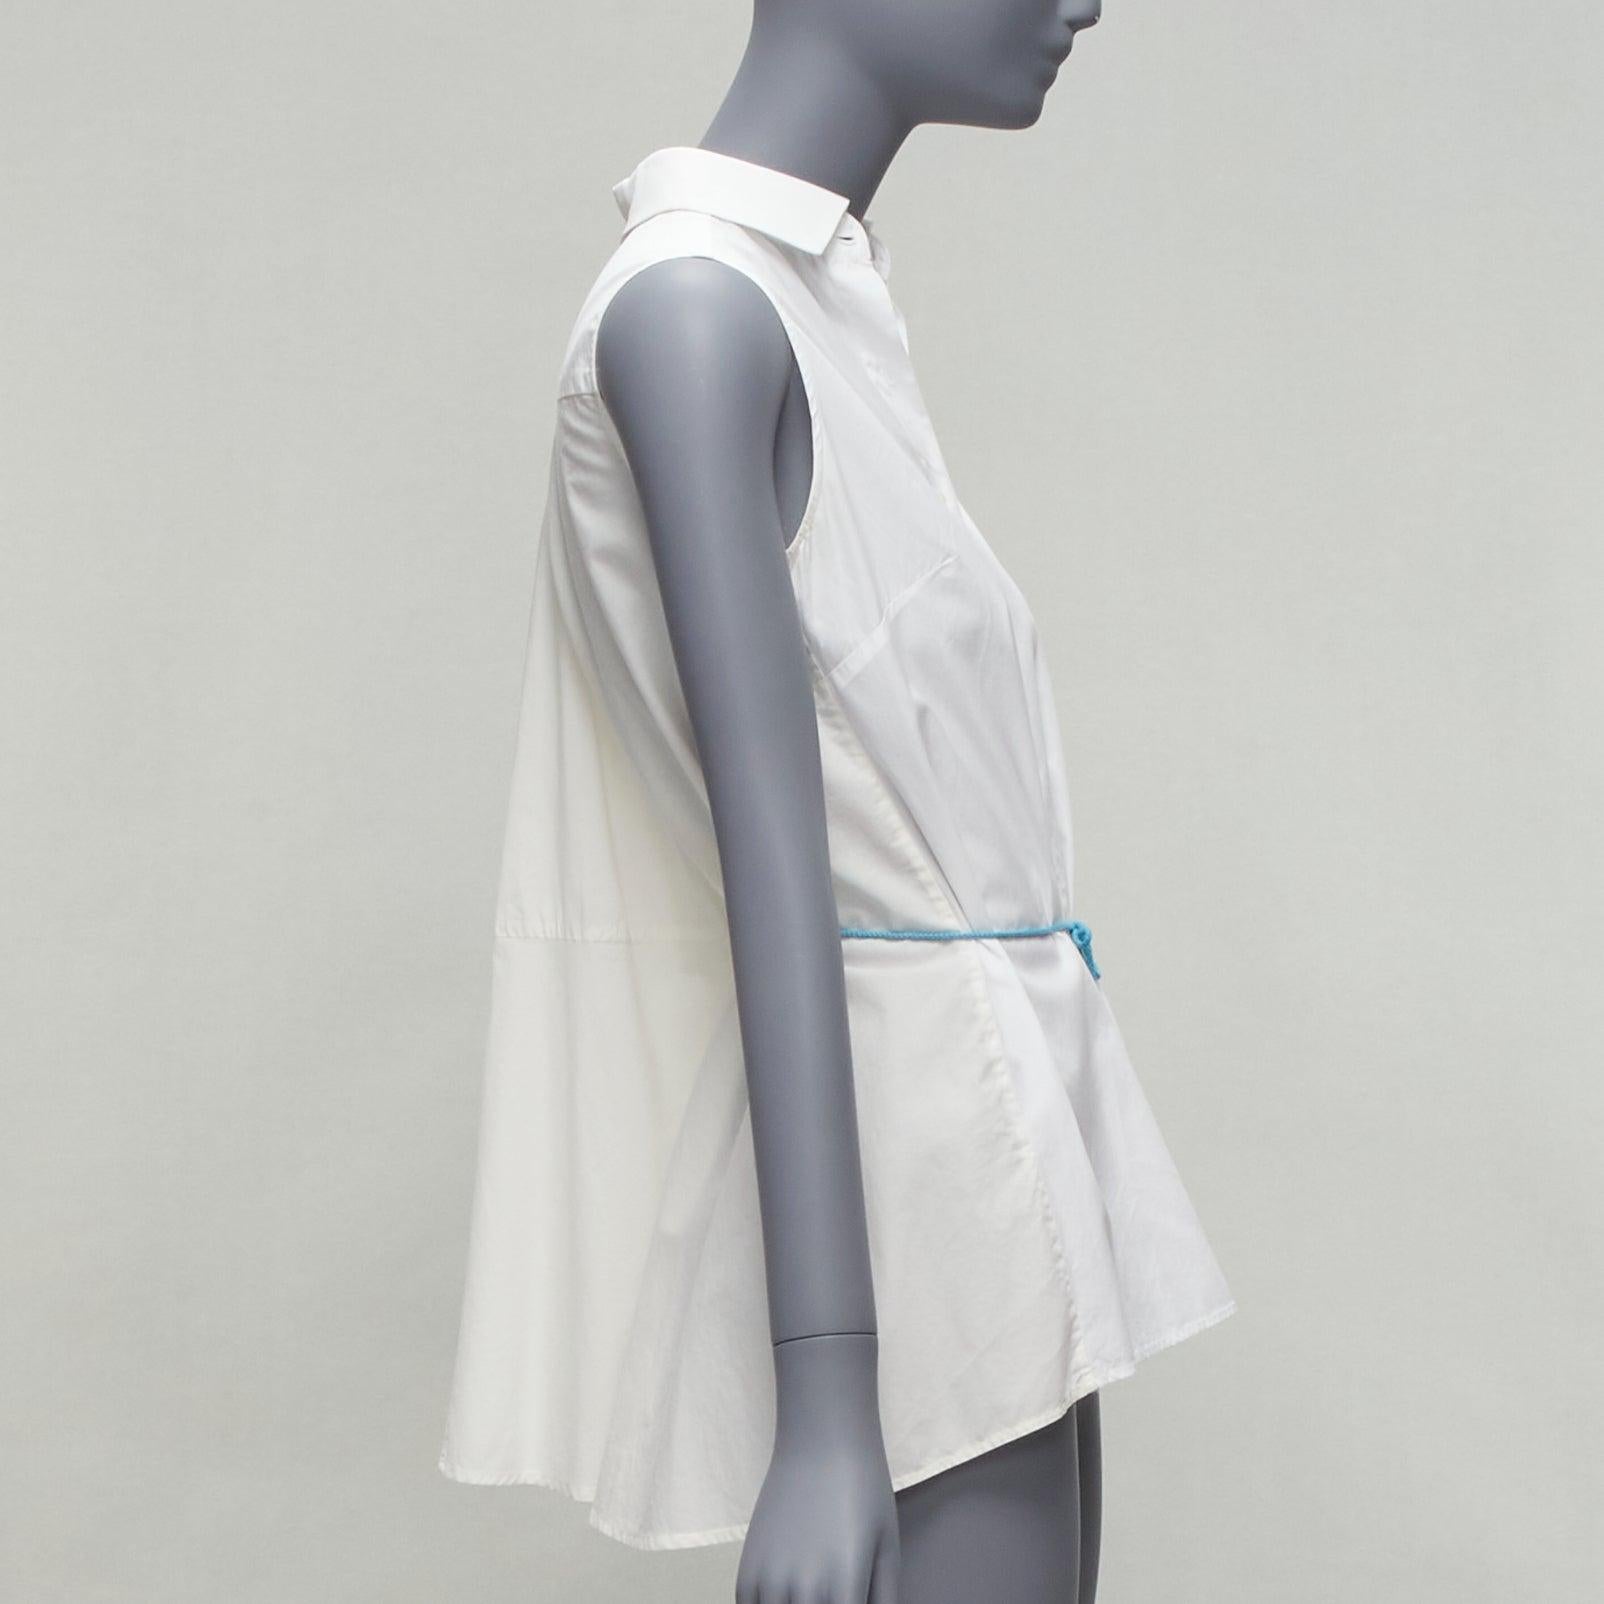 PALMER HARDING blue drawstring tie back white flare sleeveless shirt UK6 XS In Excellent Condition For Sale In Hong Kong, NT